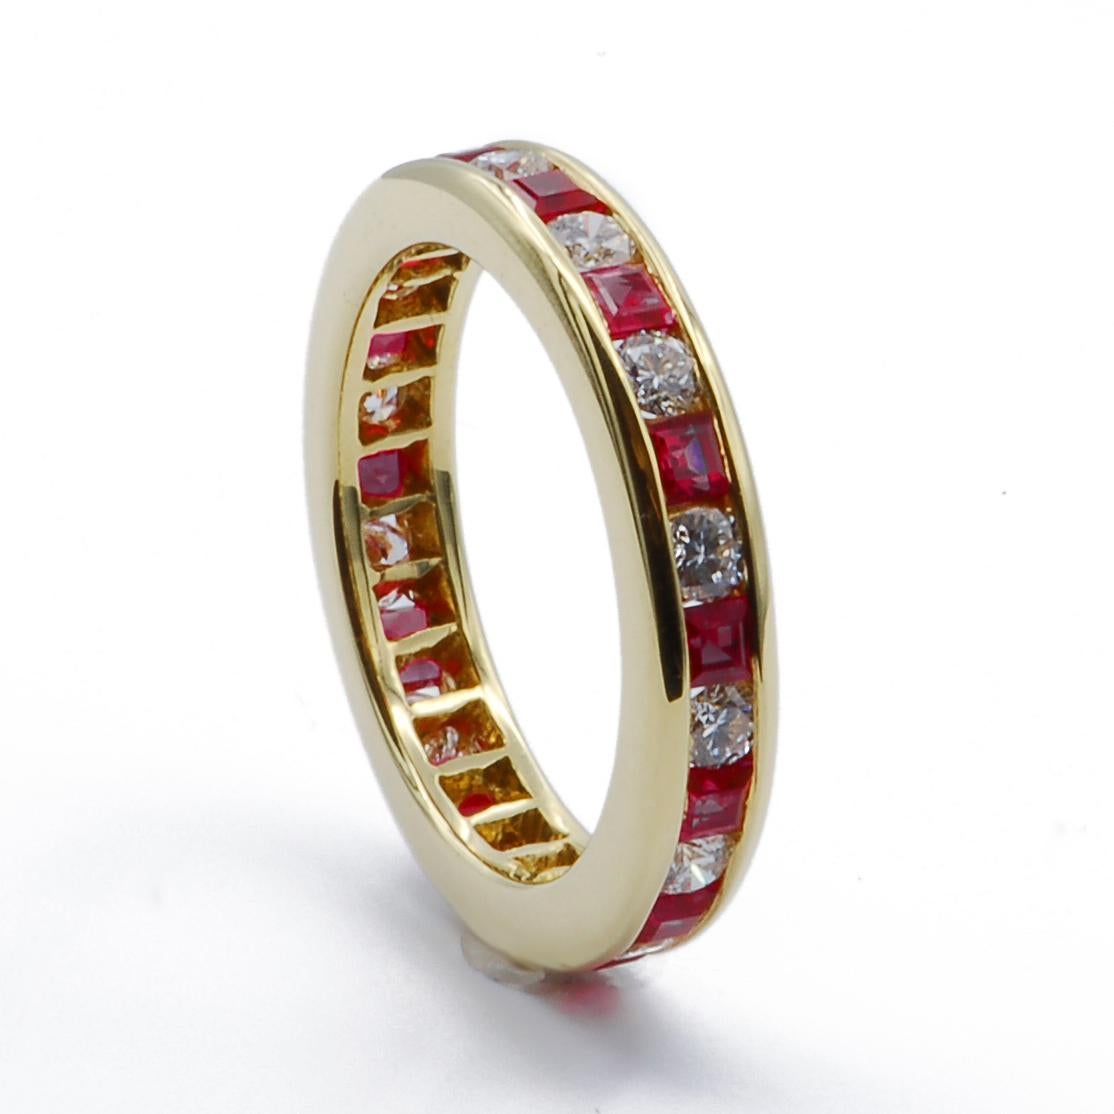 This simply graceful 18k yellow gold eternity band ring contains alternating round diamonds and square cut rubies that are extremely vibrant in color.  The stones are meticulously channel set with a seamless finish. 

0.71 Carats Diamonds
1.3 Carats